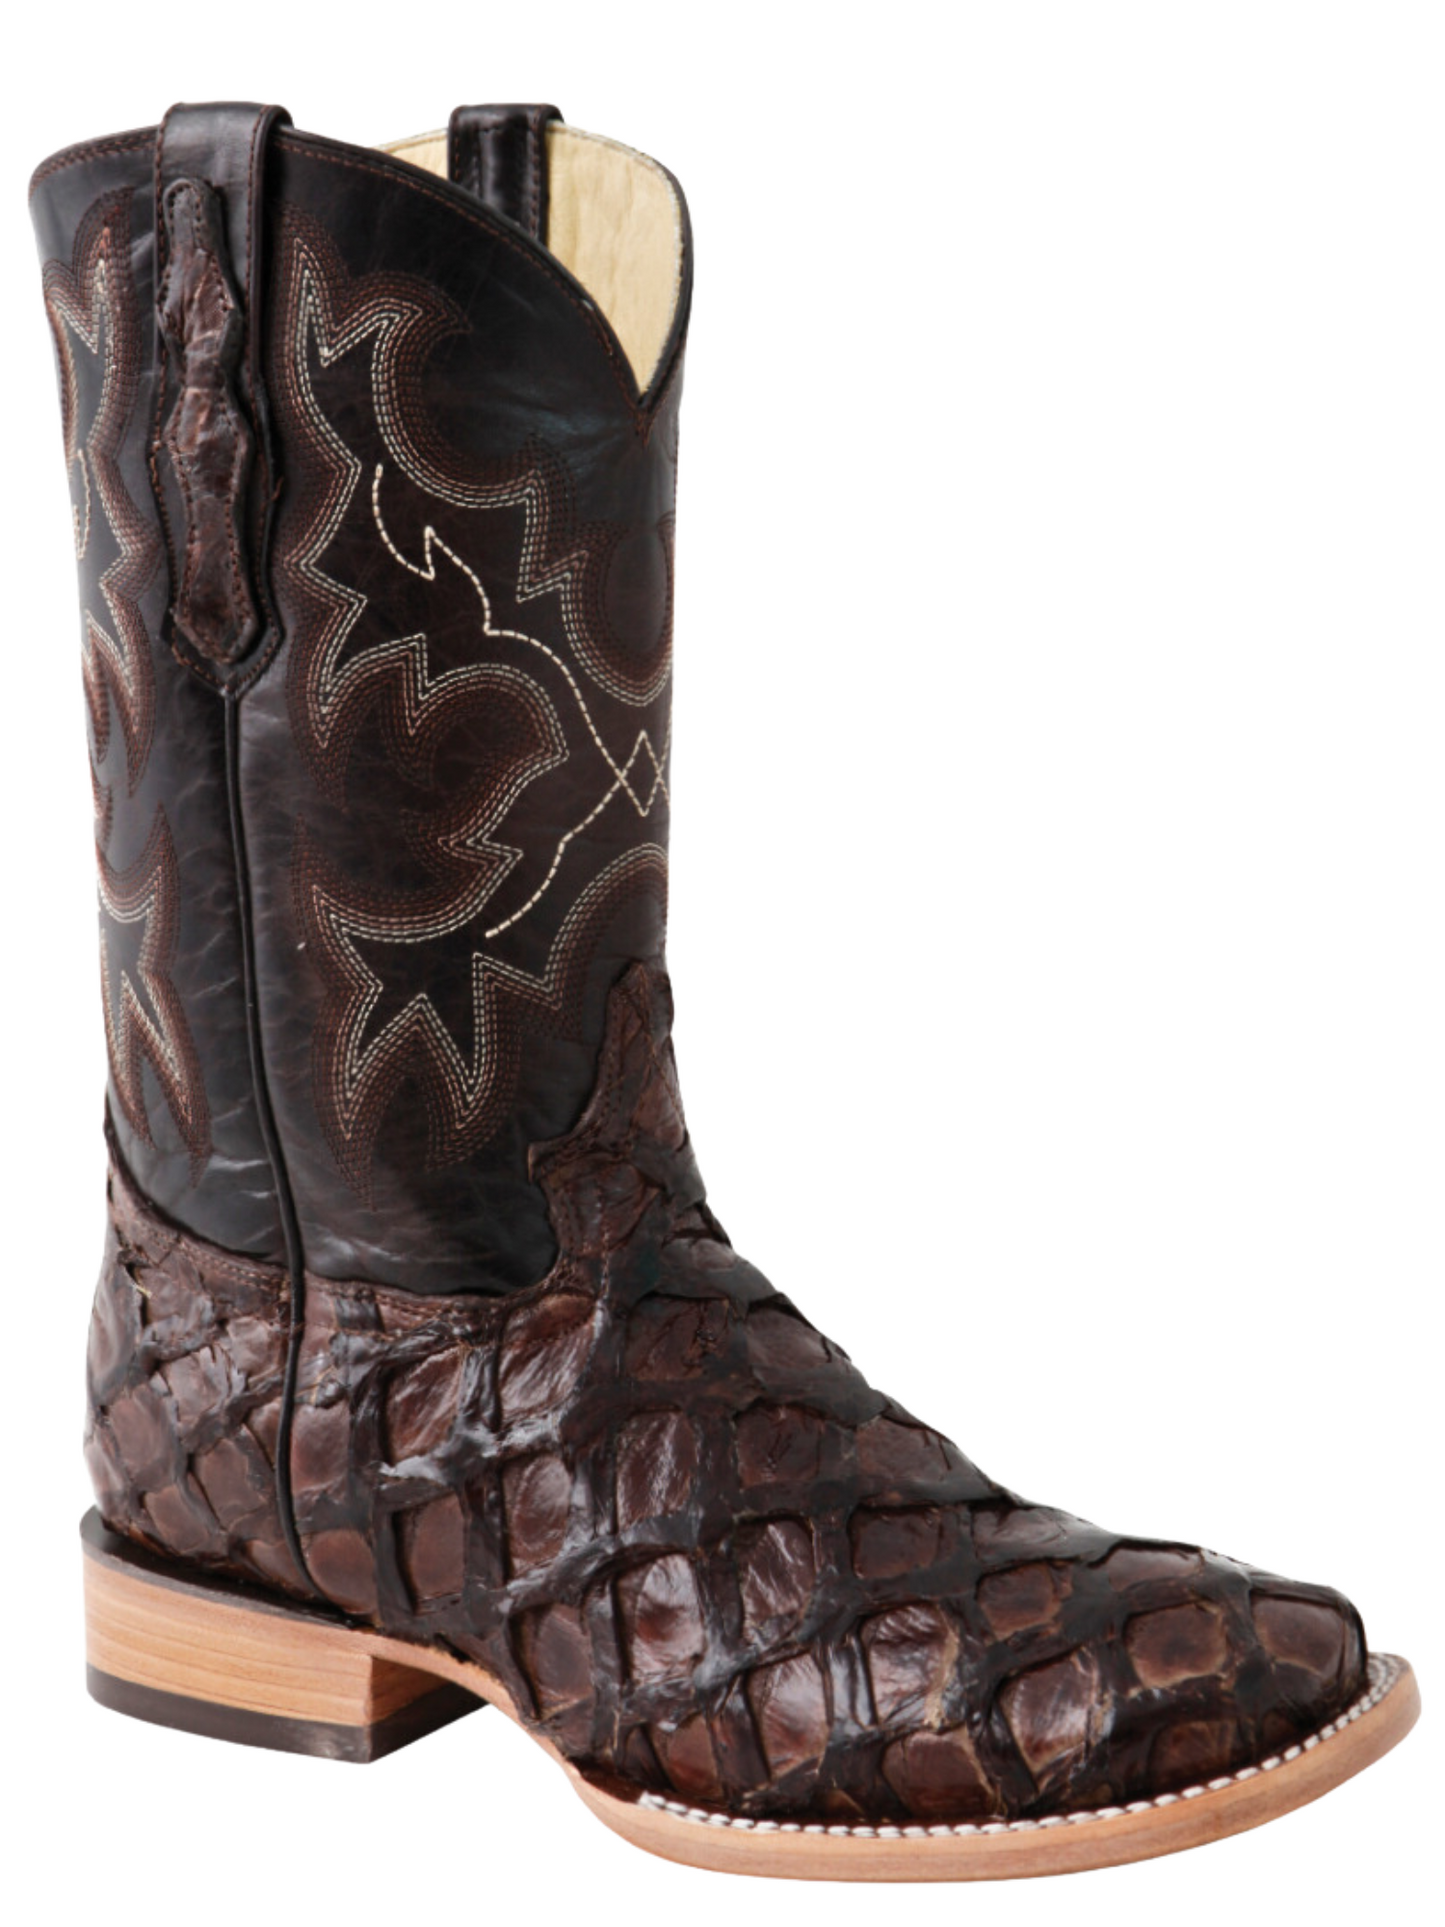 Monster Fish Original Exotic Rodeo Cowboy Boots for Men '100 Years' - ID: 44116